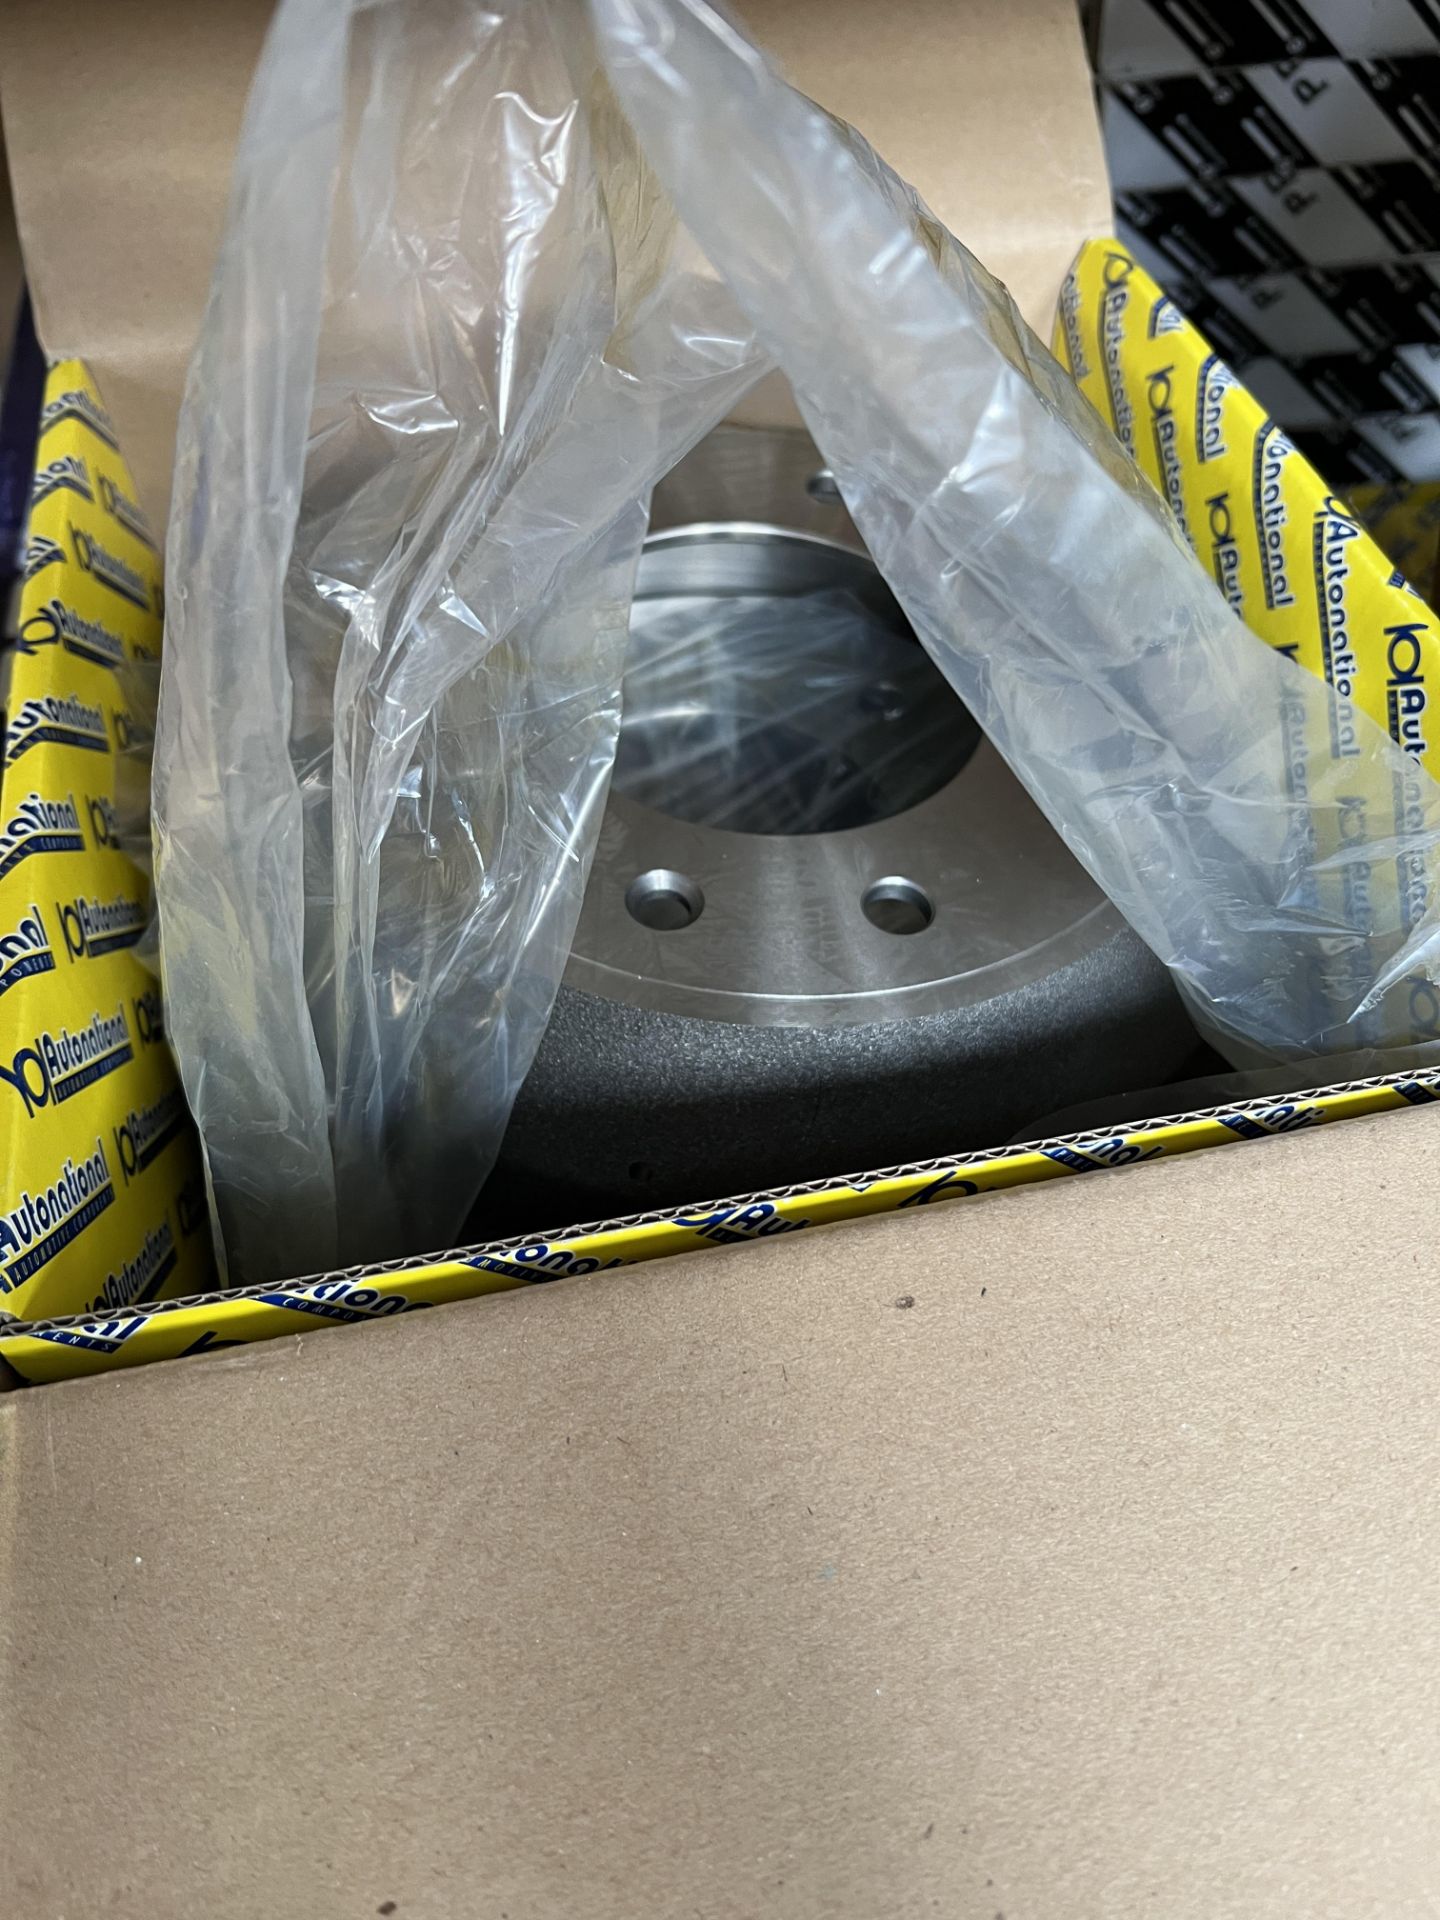 Large Quantity of Land Rover and Range Rover Components including Brake Disks, Drums, Pads, - Image 27 of 32